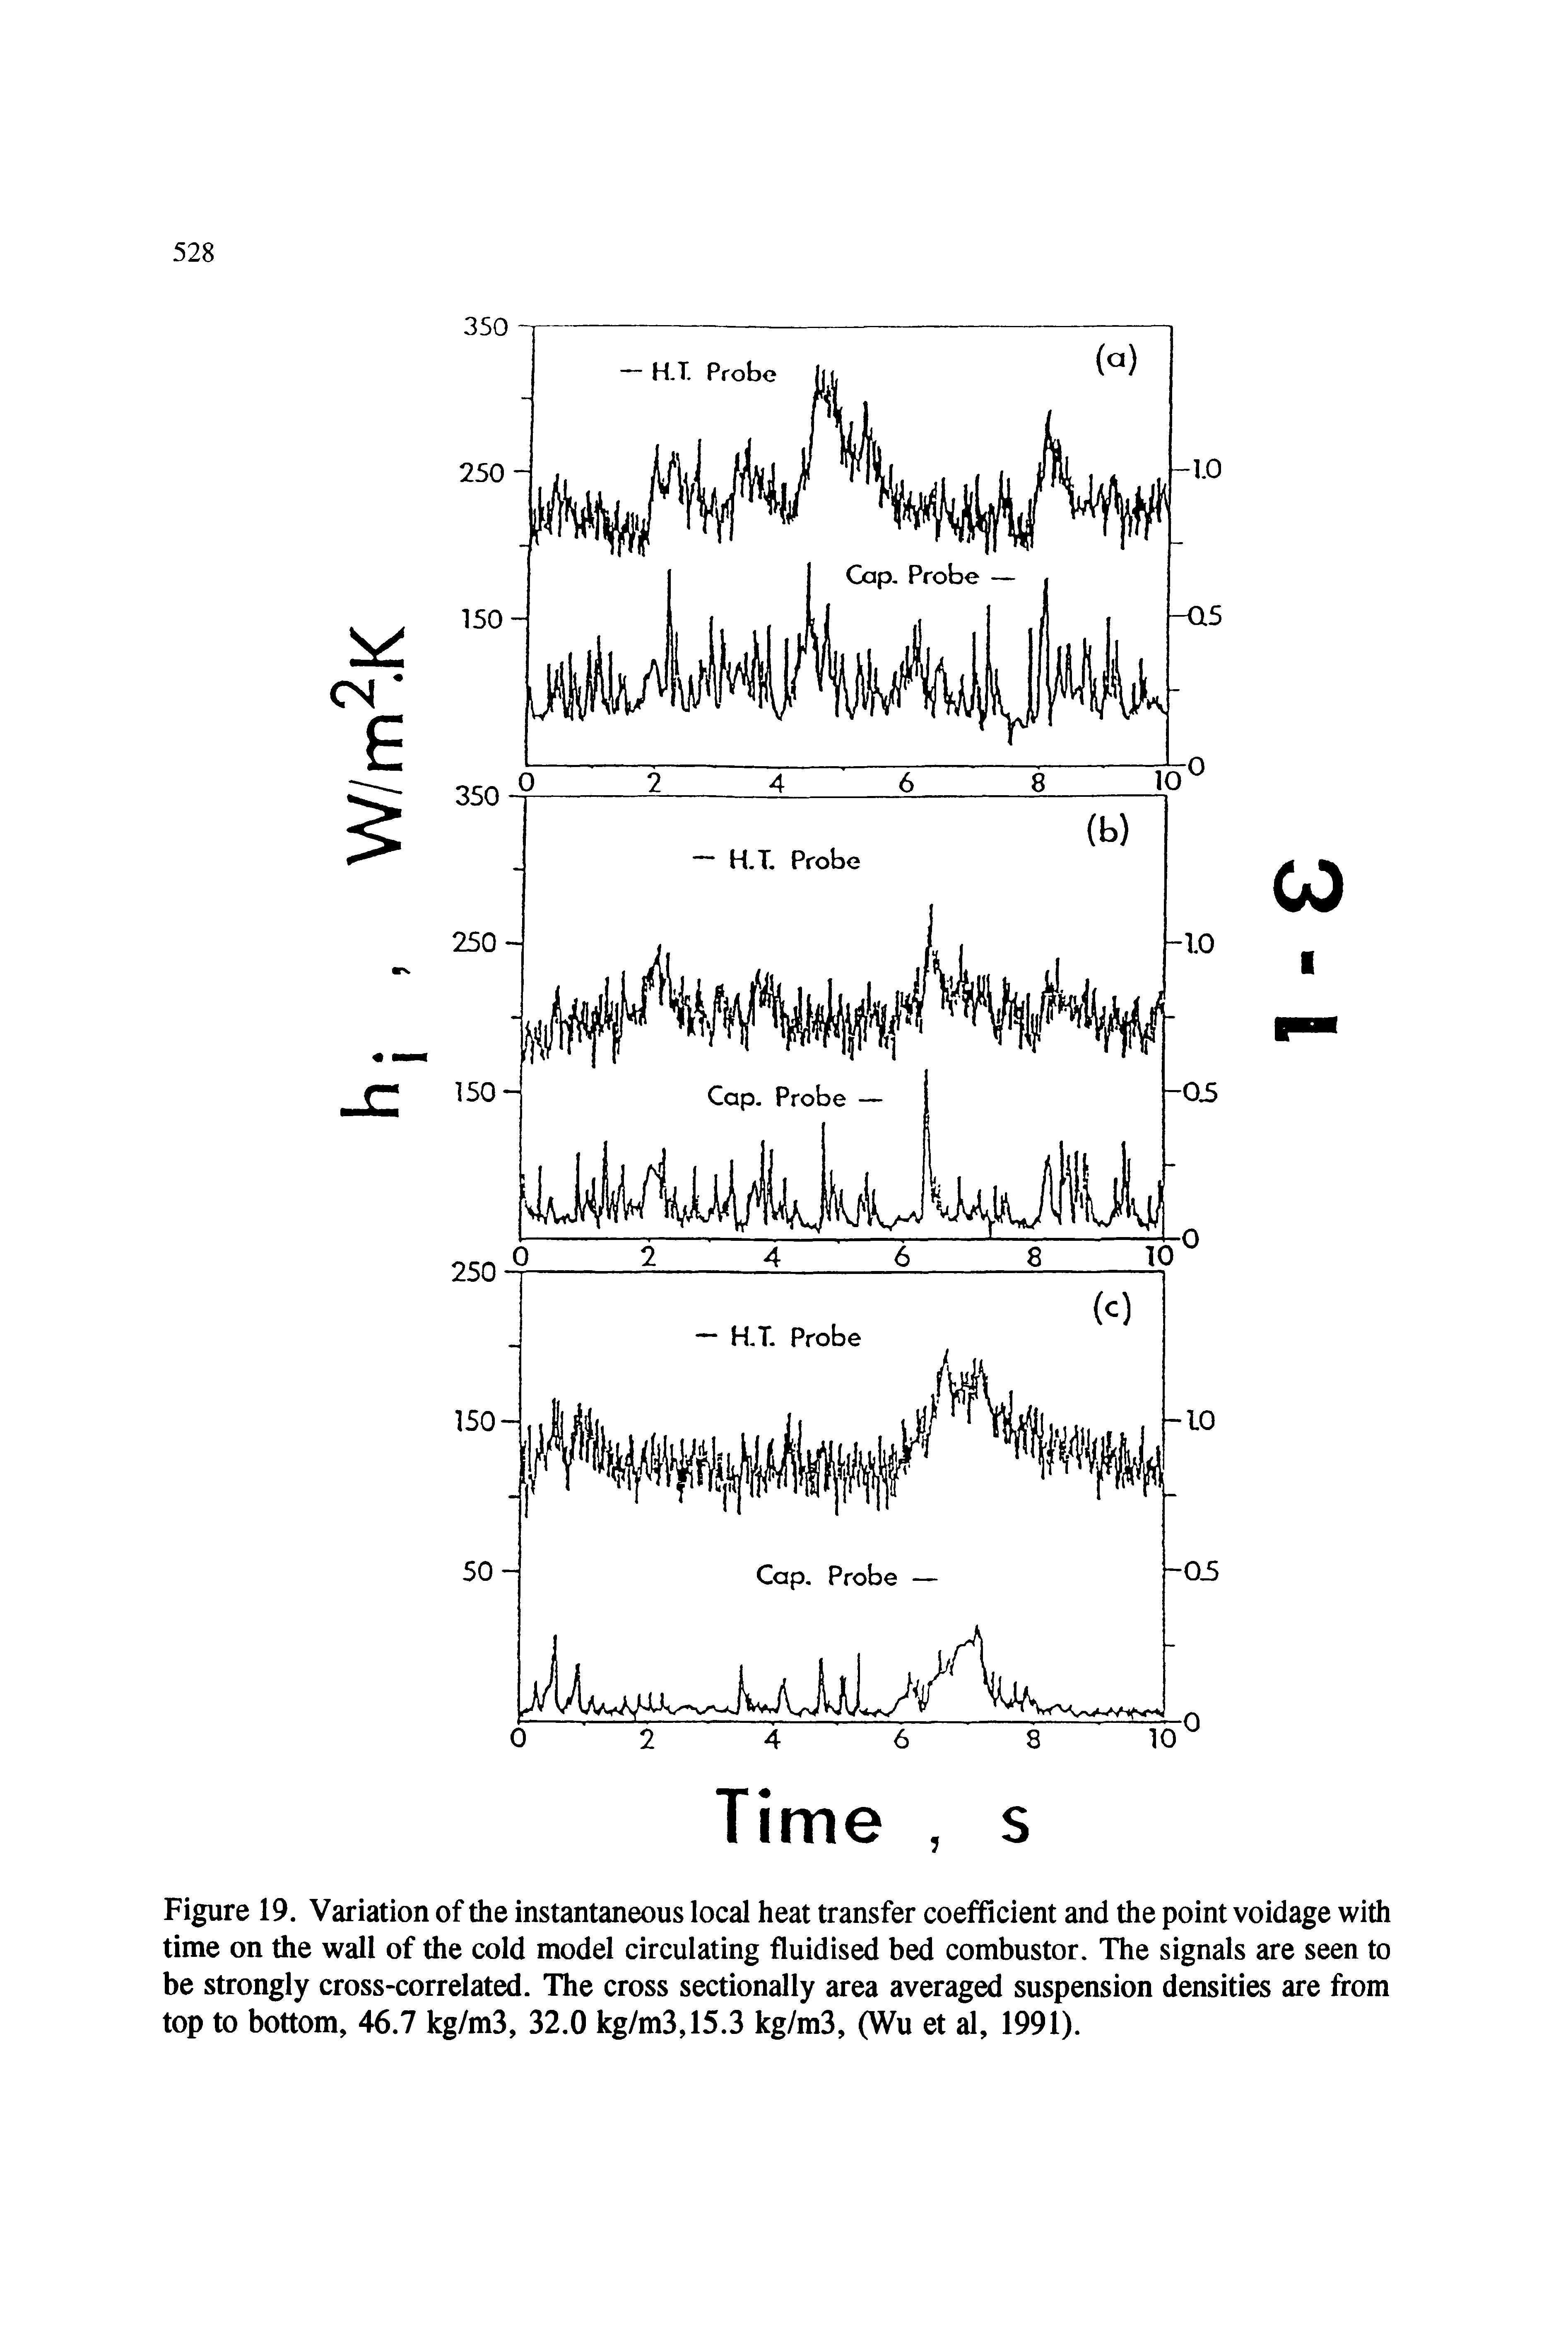 Figure 19. Variation of the instantaneous local heat transfer coefficient and the point voidage with time on the wall of the cold model circulating fluidised bed combustor. The signals are seen to be strongly cross-correlated. The cross sectionally area averaged suspension densities are from top to bottom, 46.7 kg/m3, 32.0 kg/m3,15.3 kg/m3, (Wu et al, 1991).